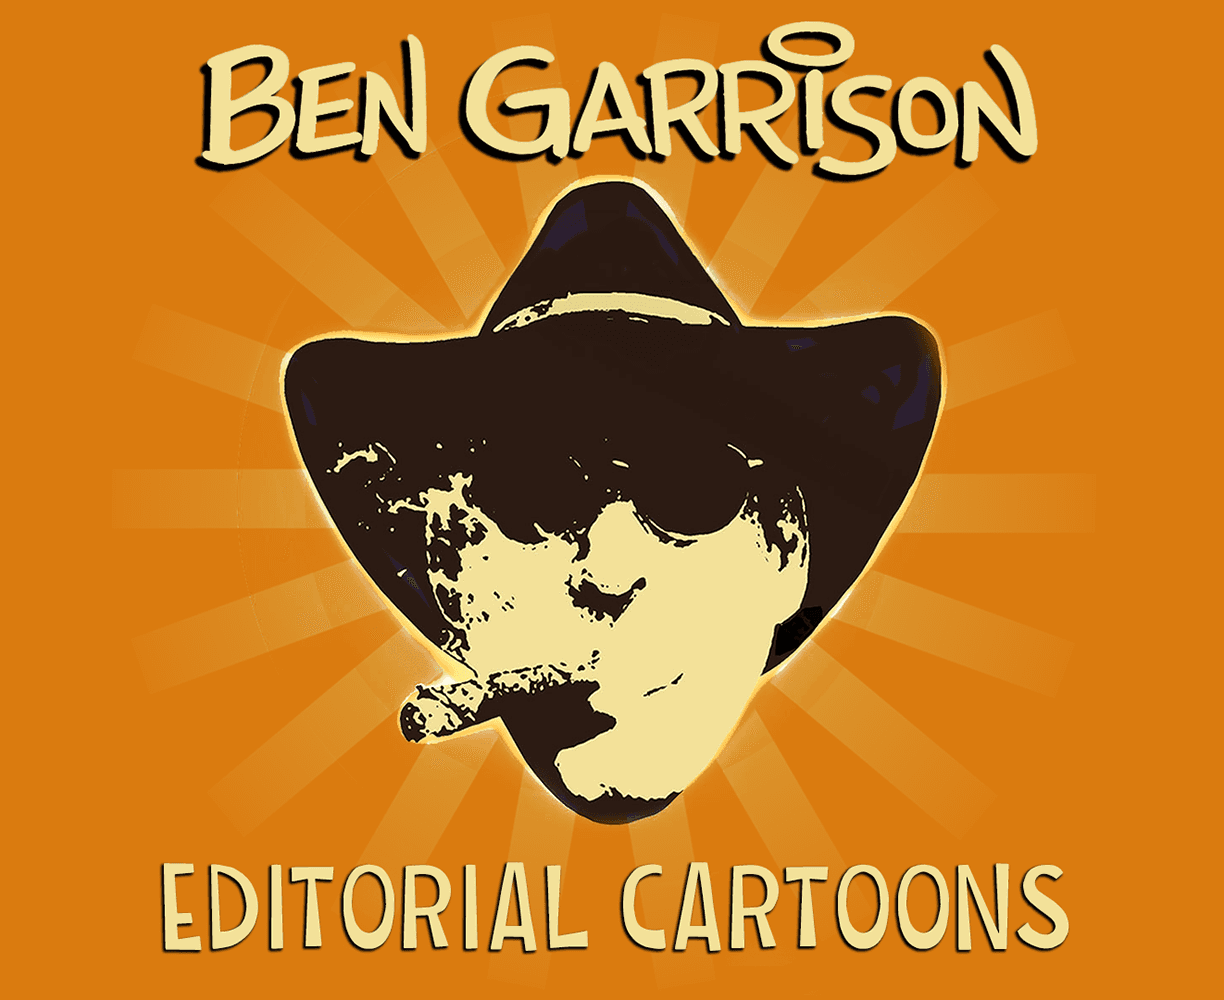 The cover art for the episode Big Box Stores from the comics series Ben Garrison, which is number 142 in the series